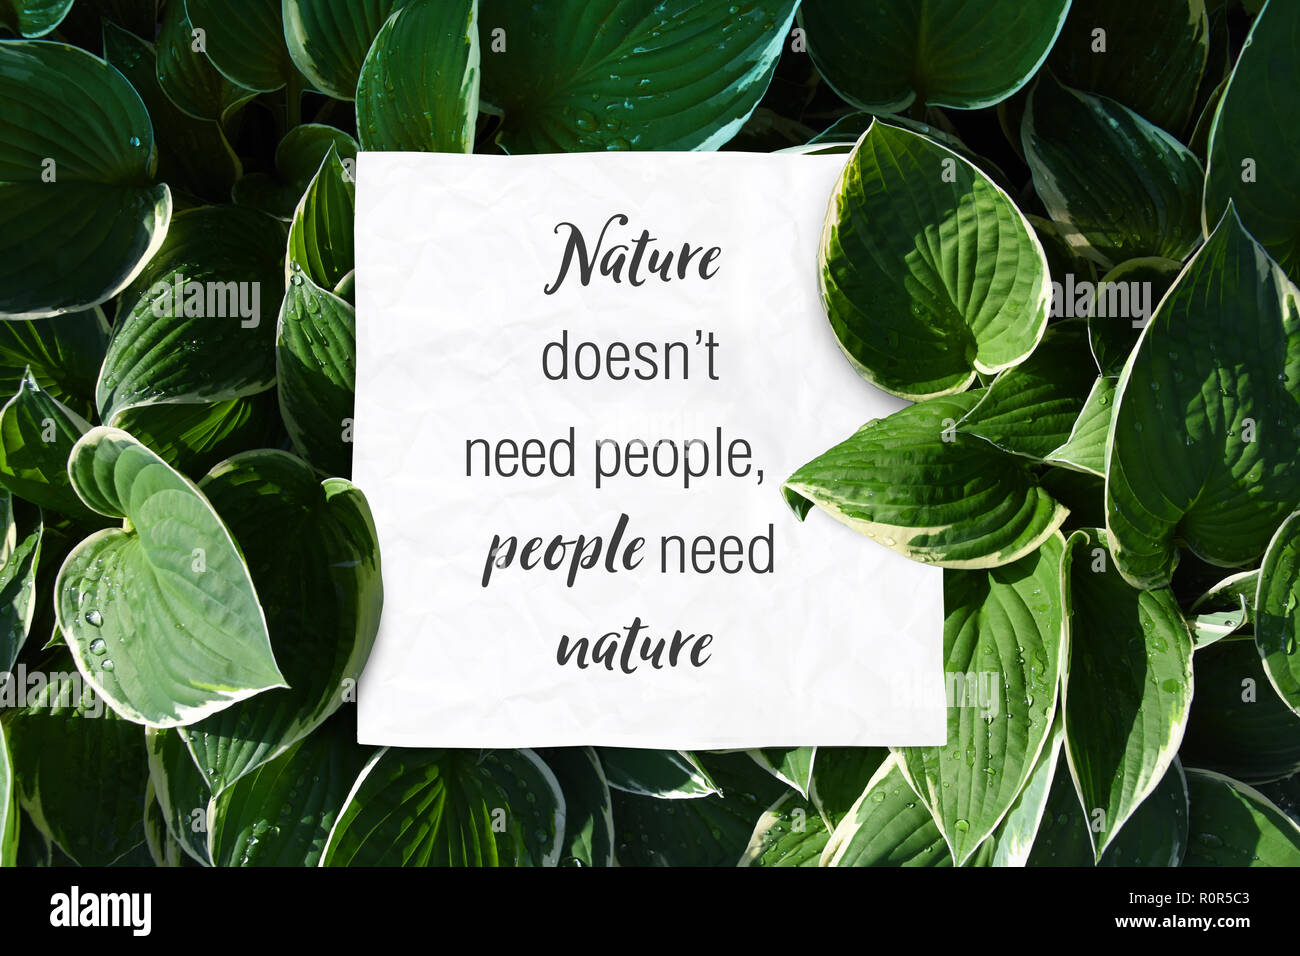 Text quote nature doesnt need people but people need nature save the world quotes Stock Photo